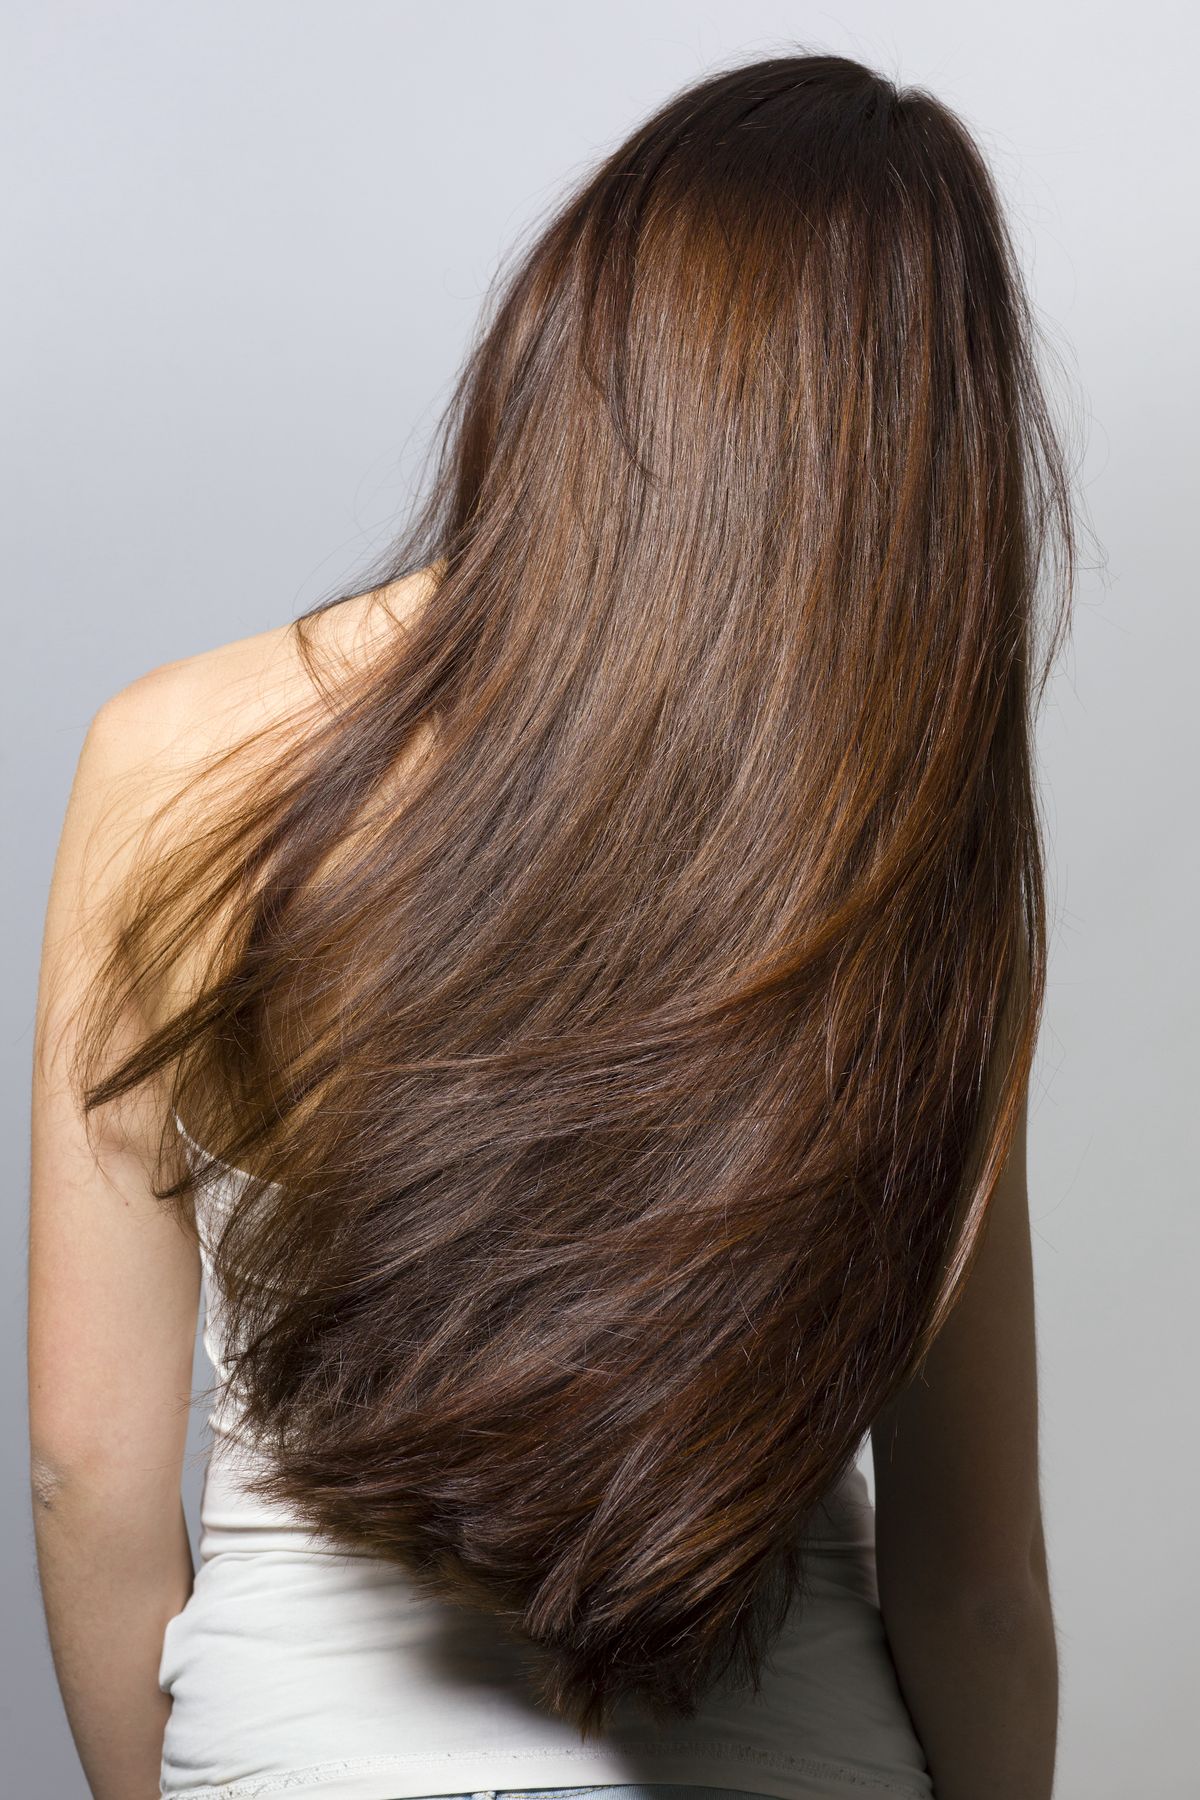 long hair from behind isolated on gray background